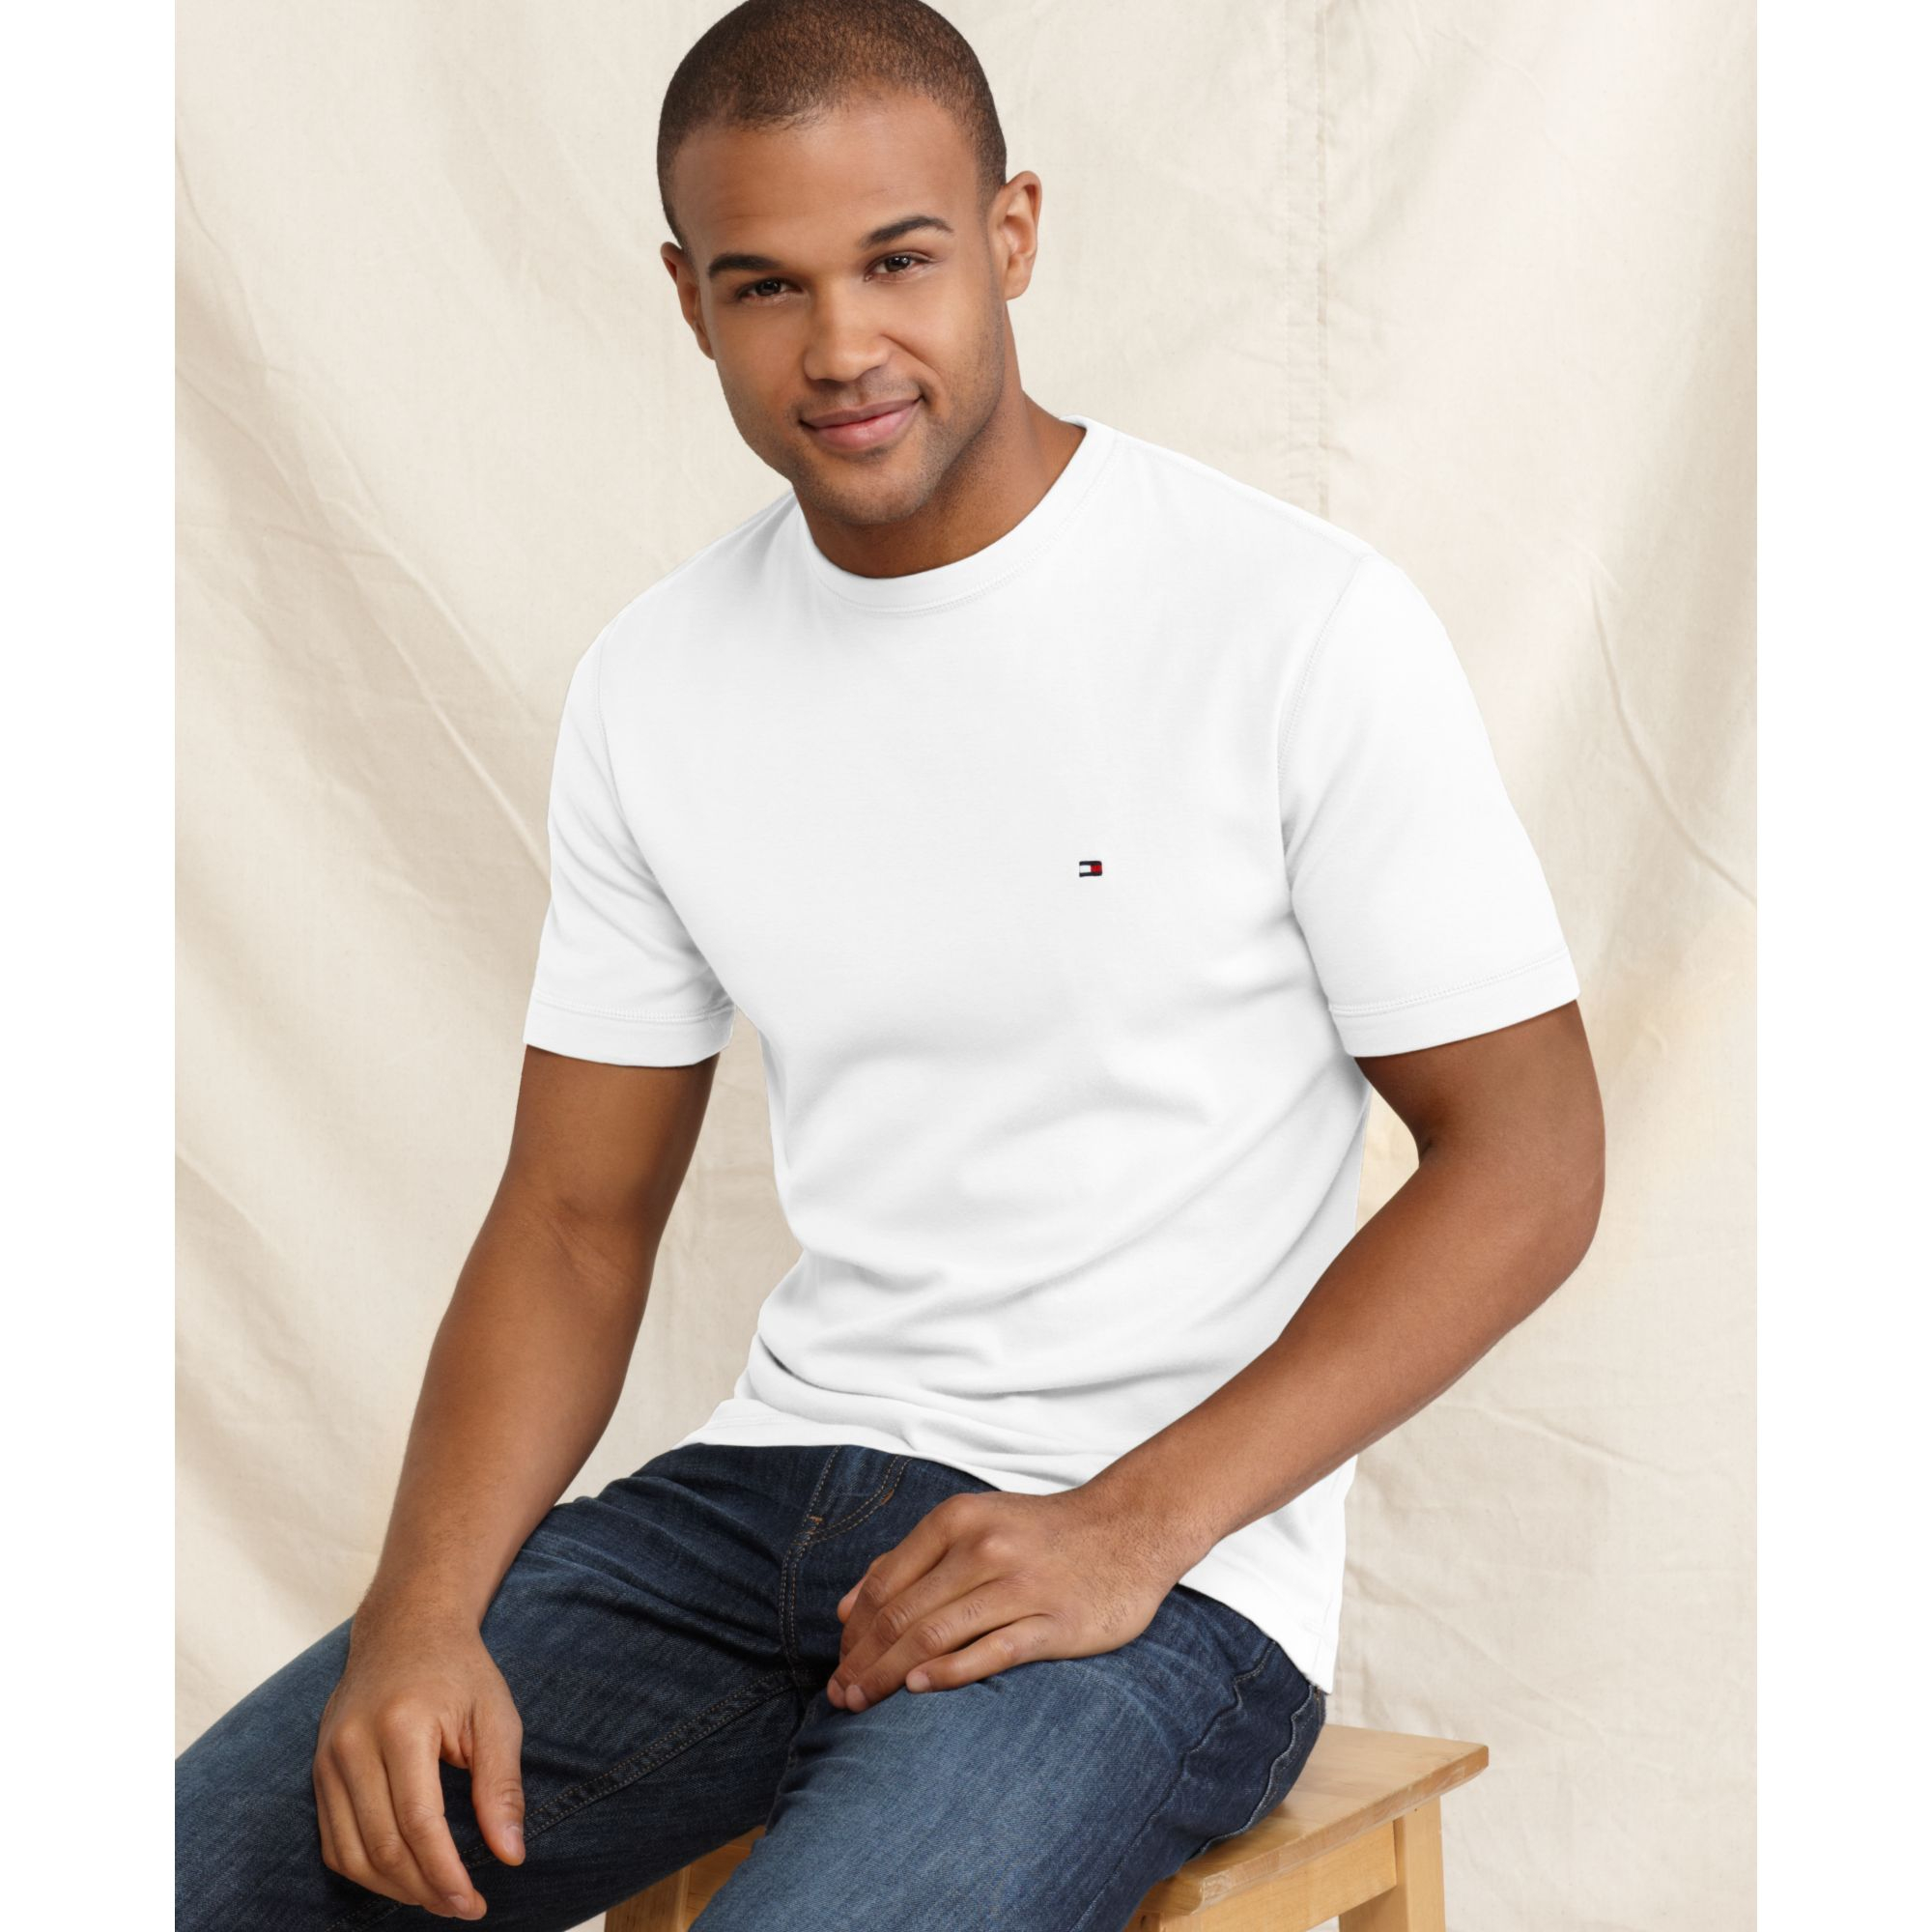 Tommy Hilfiger American T Shirt in White for Men - Lyst